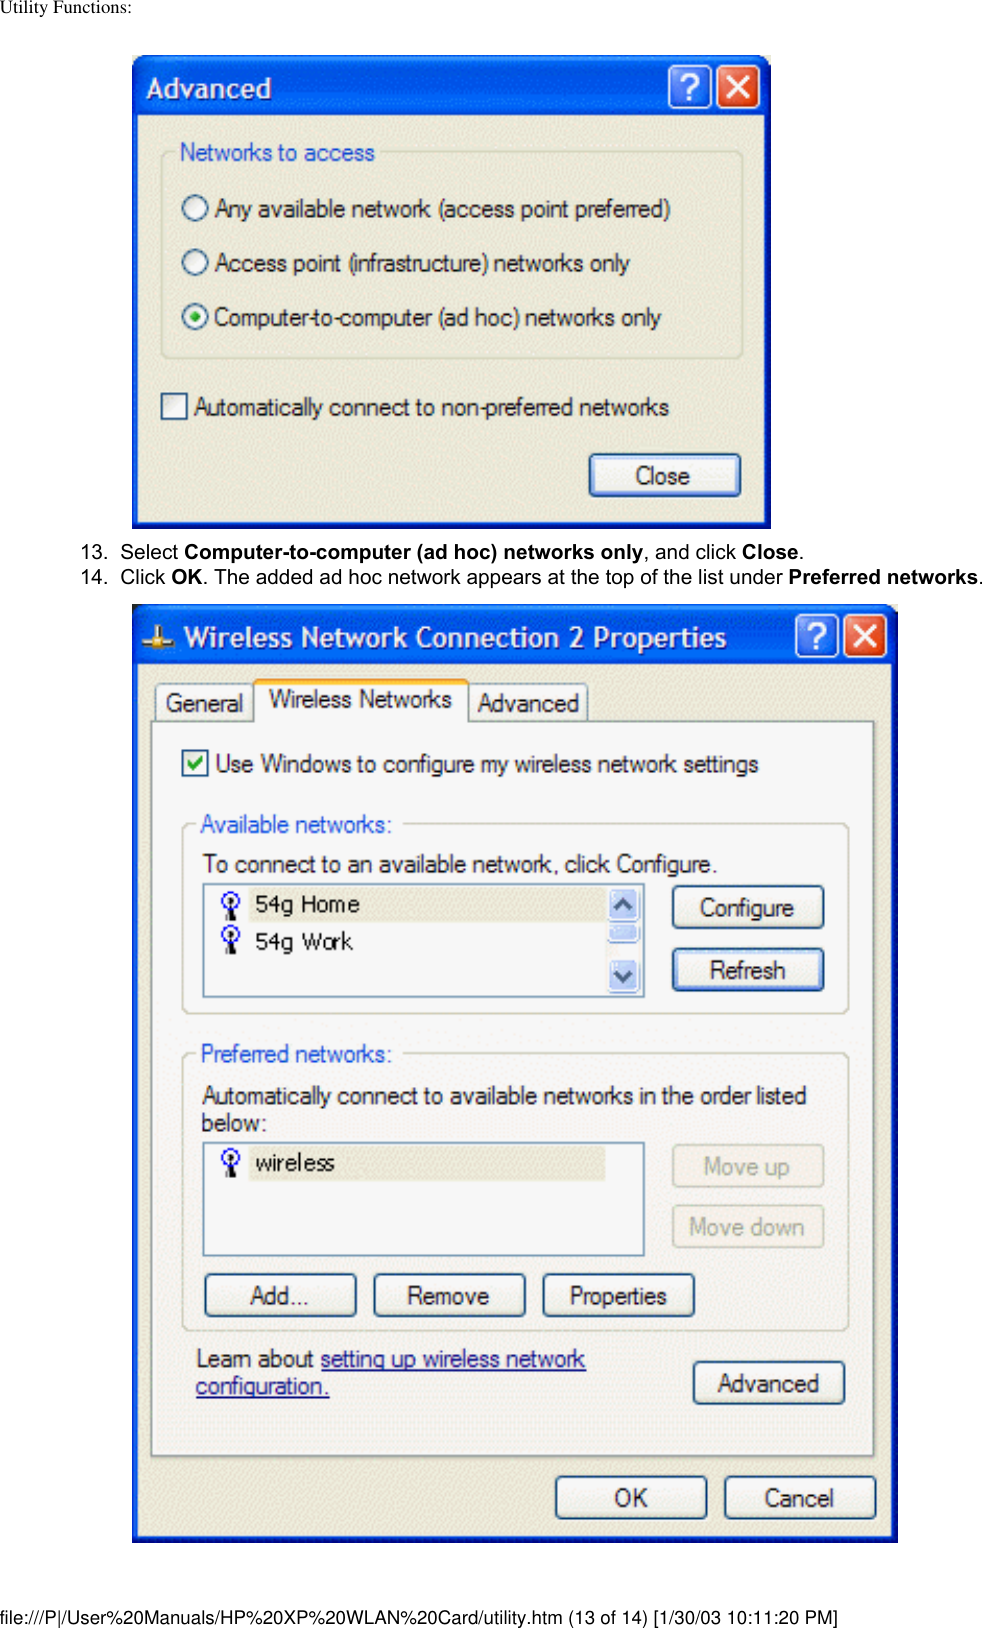 Utility Functions: 13.  Select Computer-to-computer (ad hoc) networks only, and click Close. 14.  Click OK. The added ad hoc network appears at the top of the list under Preferred networks. file:///P|/User%20Manuals/HP%20XP%20WLAN%20Card/utility.htm (13 of 14) [1/30/03 10:11:20 PM]